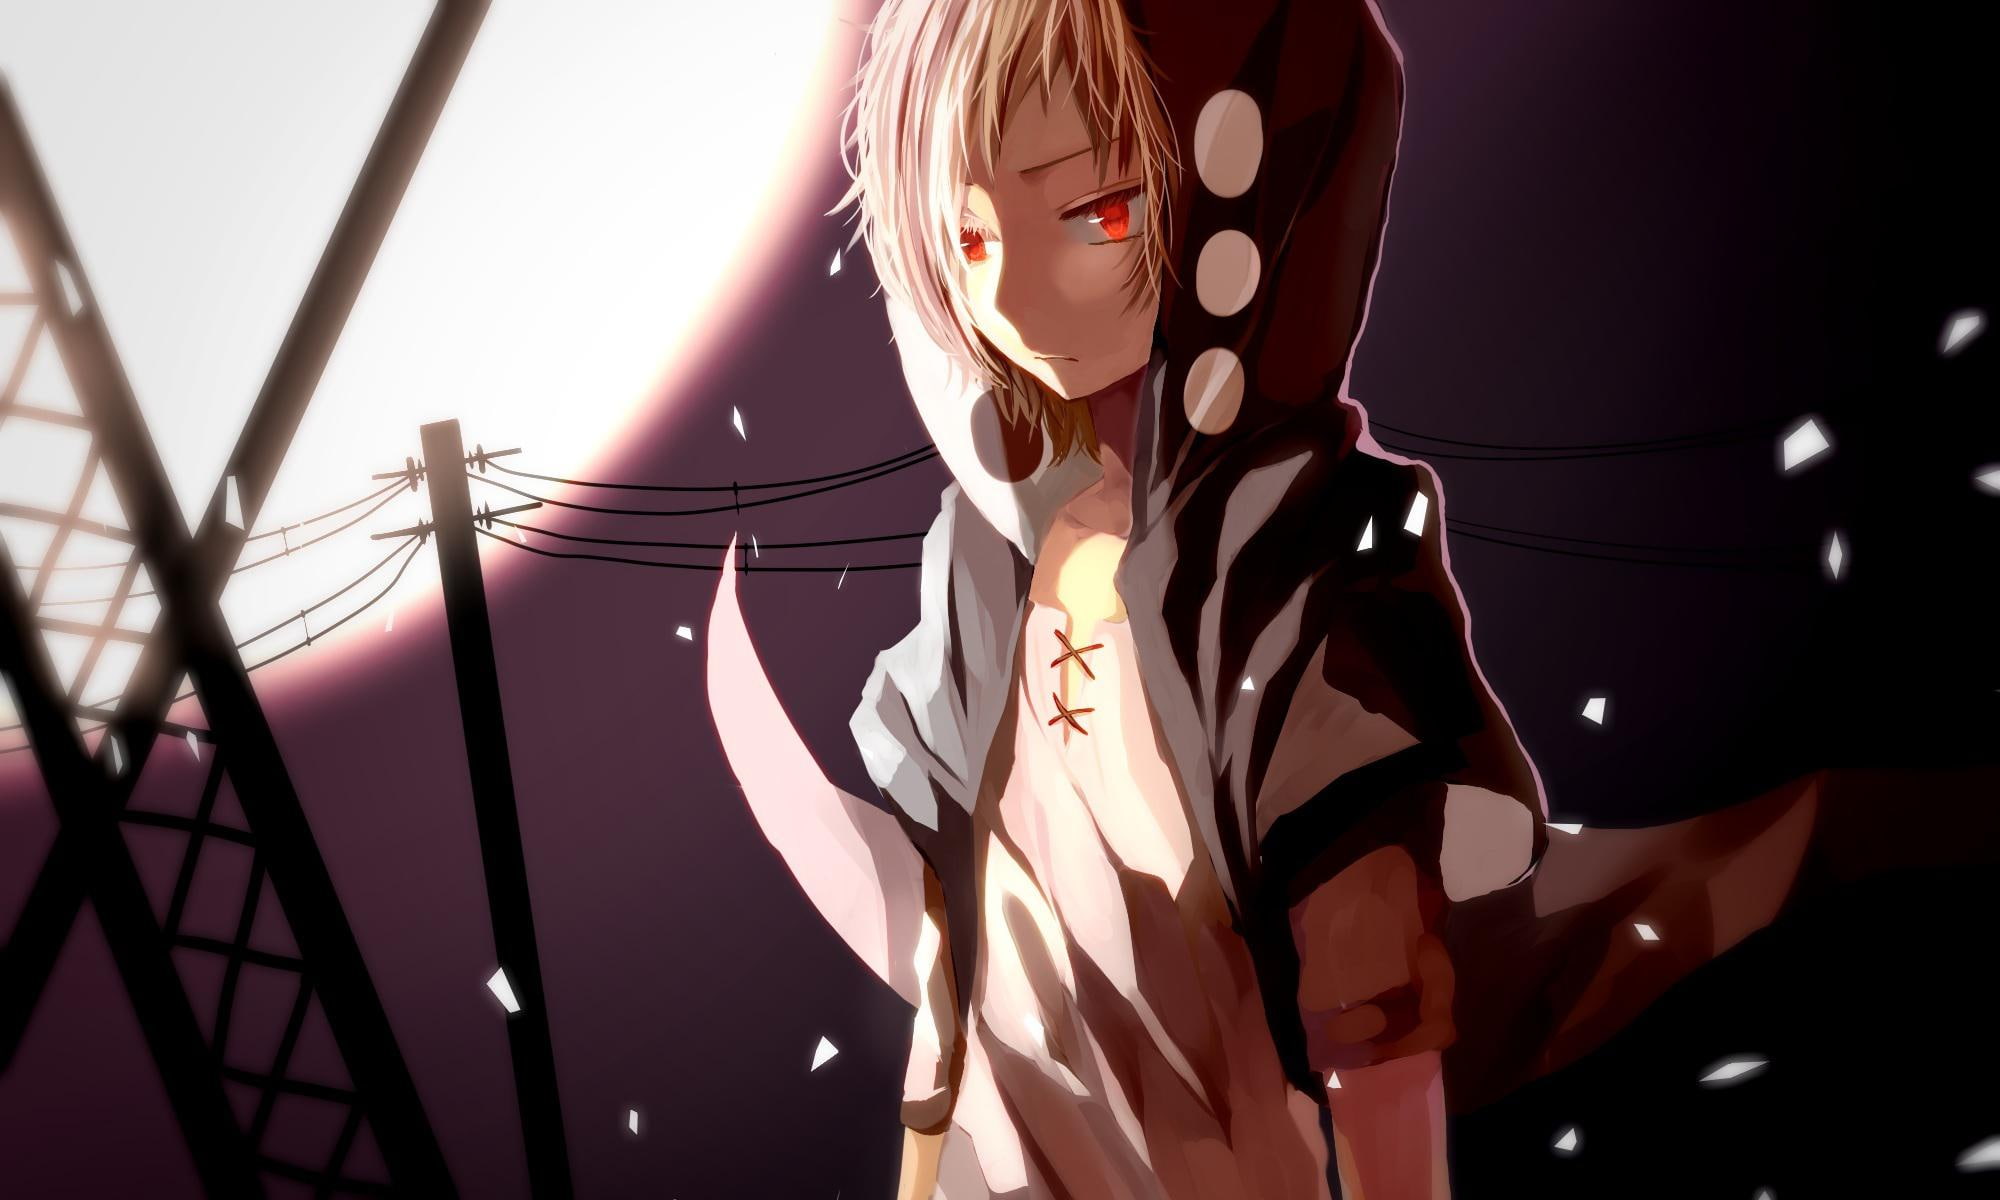 ri-rihoo, kagerou project, vocaloid, art, kid, light, hood, anime character in [pink hair and black jacket